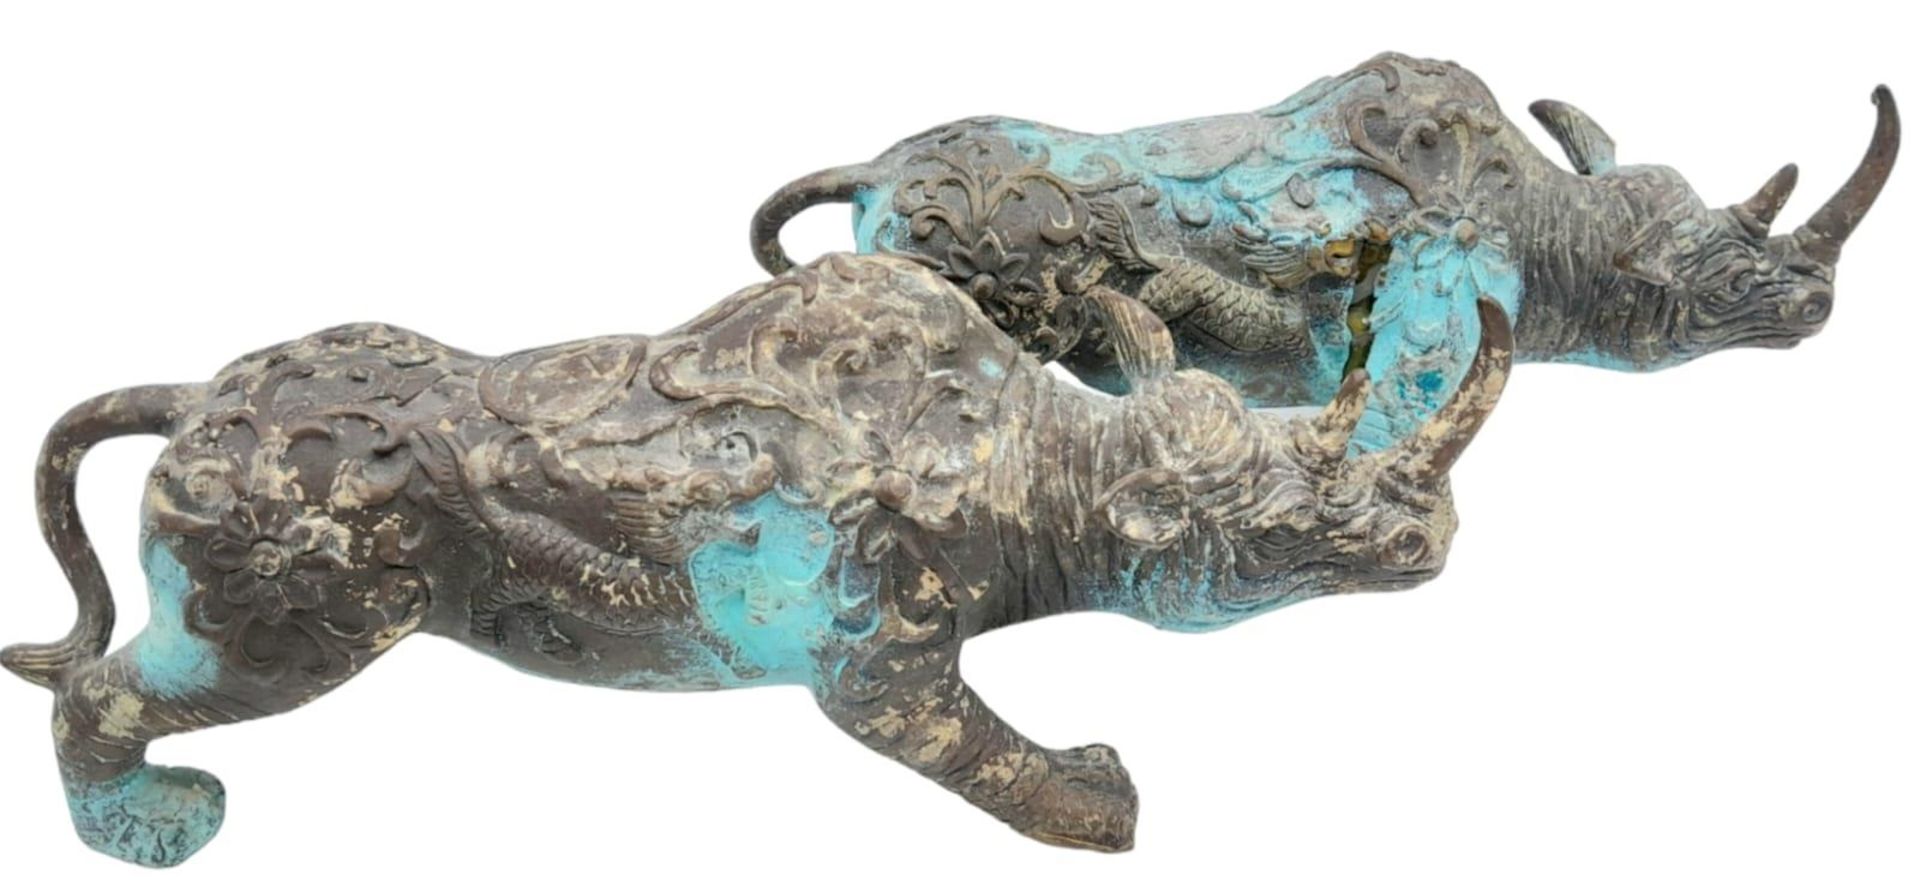 A PAIR OF VERY EARLY ANTIQUE CHINESE BRONZE WARE CEREMONIAL RHINOCEROSES WITH DRAGON ON FLANKS, - Image 2 of 8